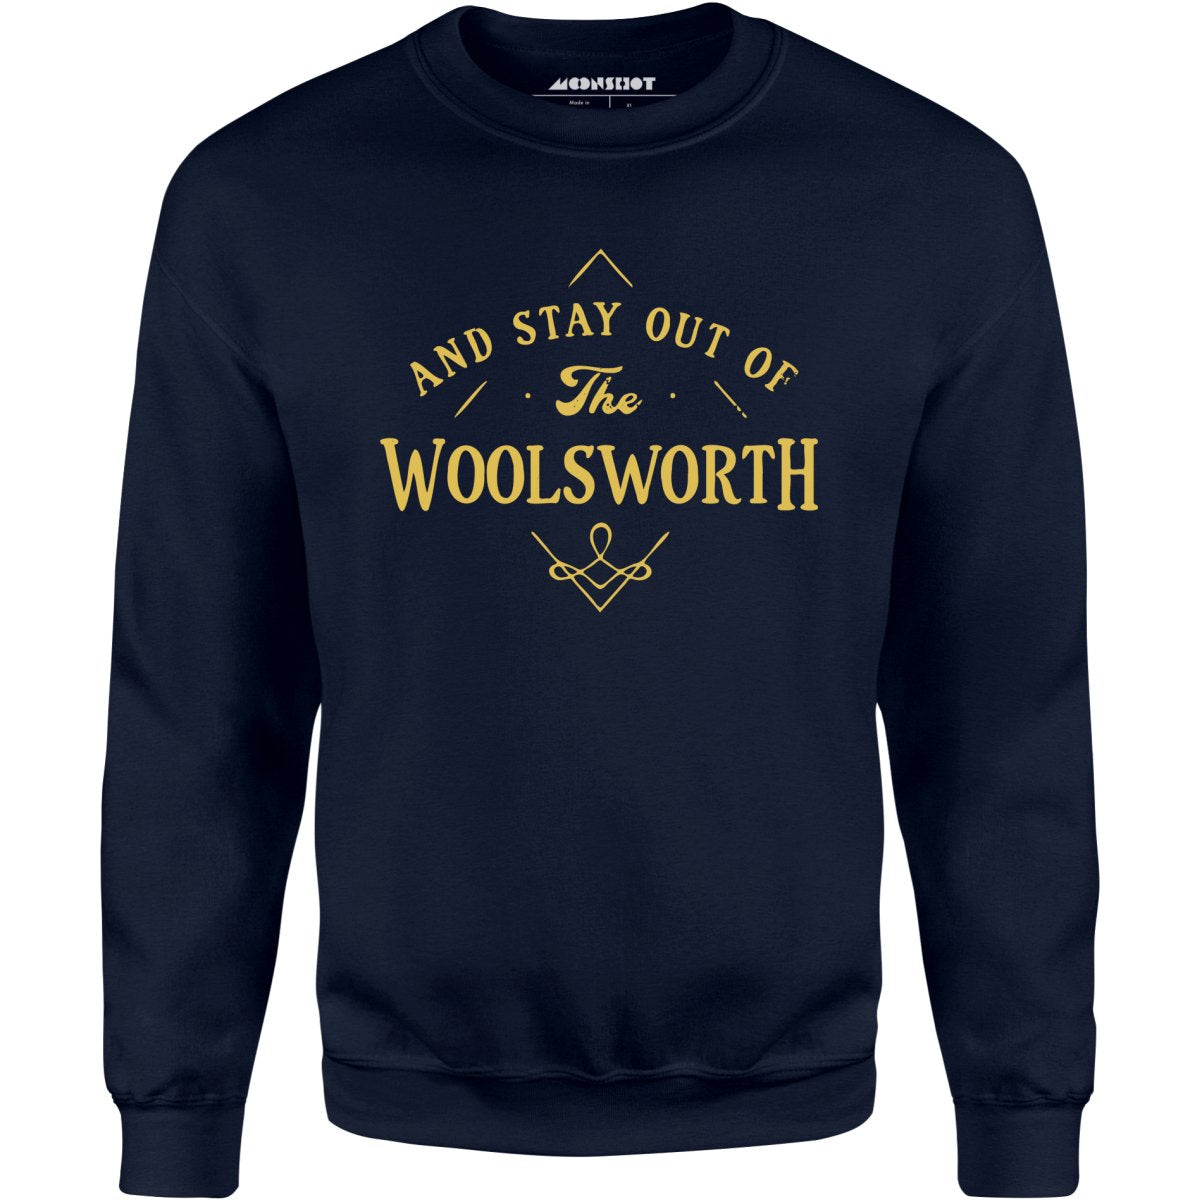 And Stay Out of The Woolsworth - Unisex Sweatshirt